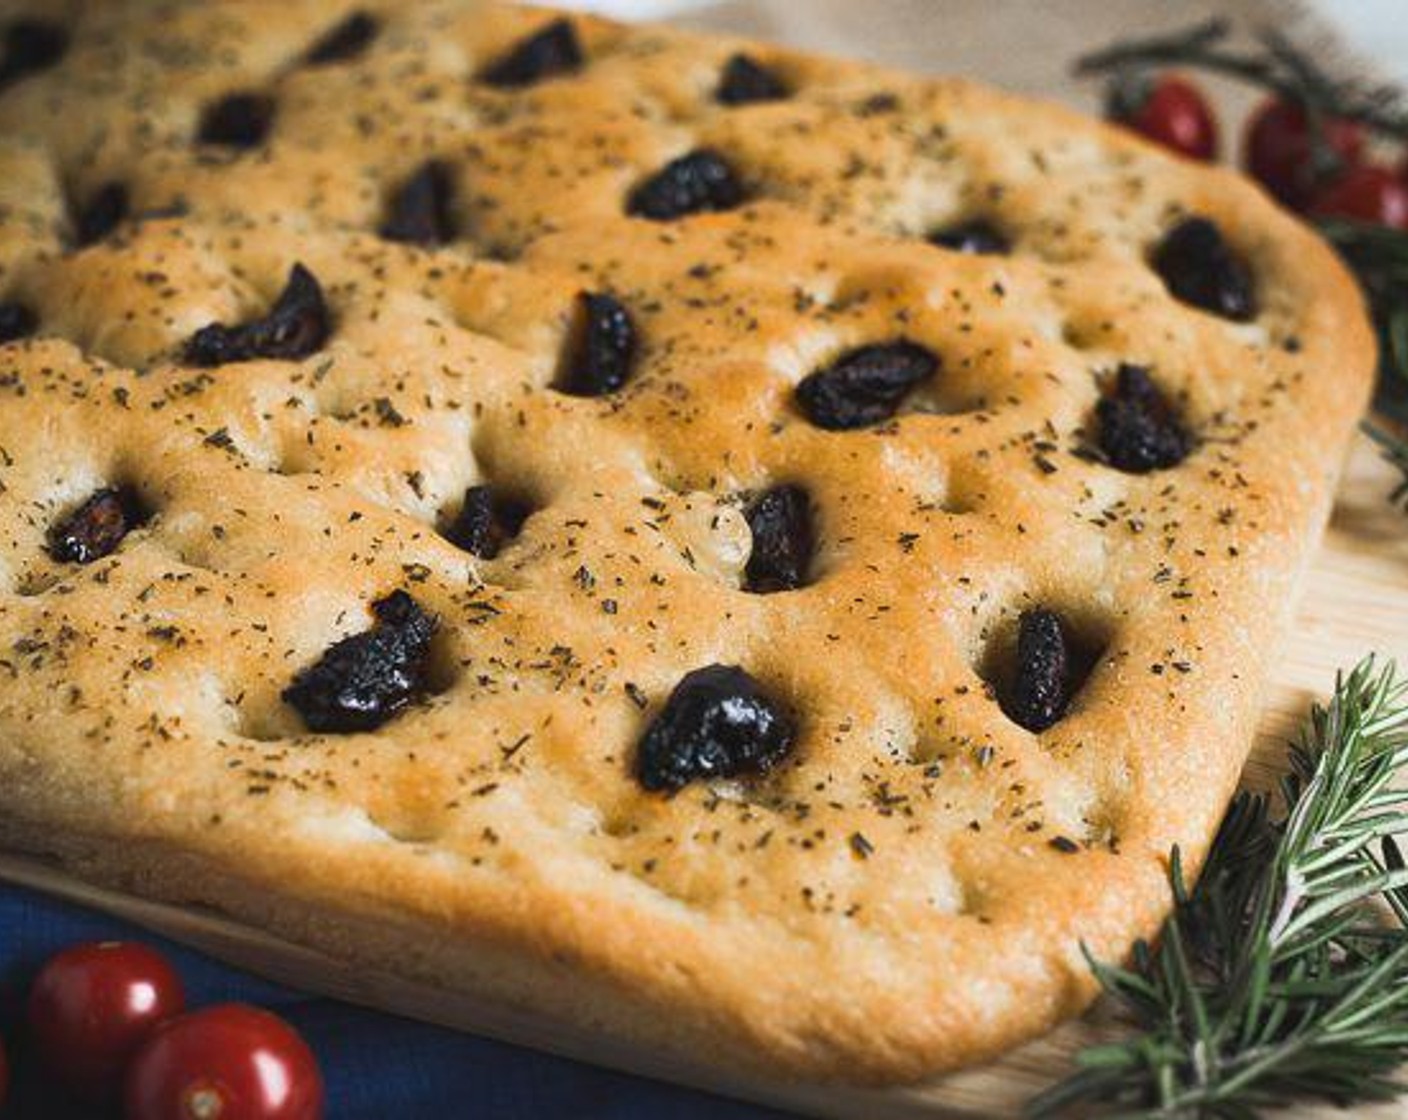 Italian Focaccia Bread with Sun Blushed Tomatoes and Rosemary